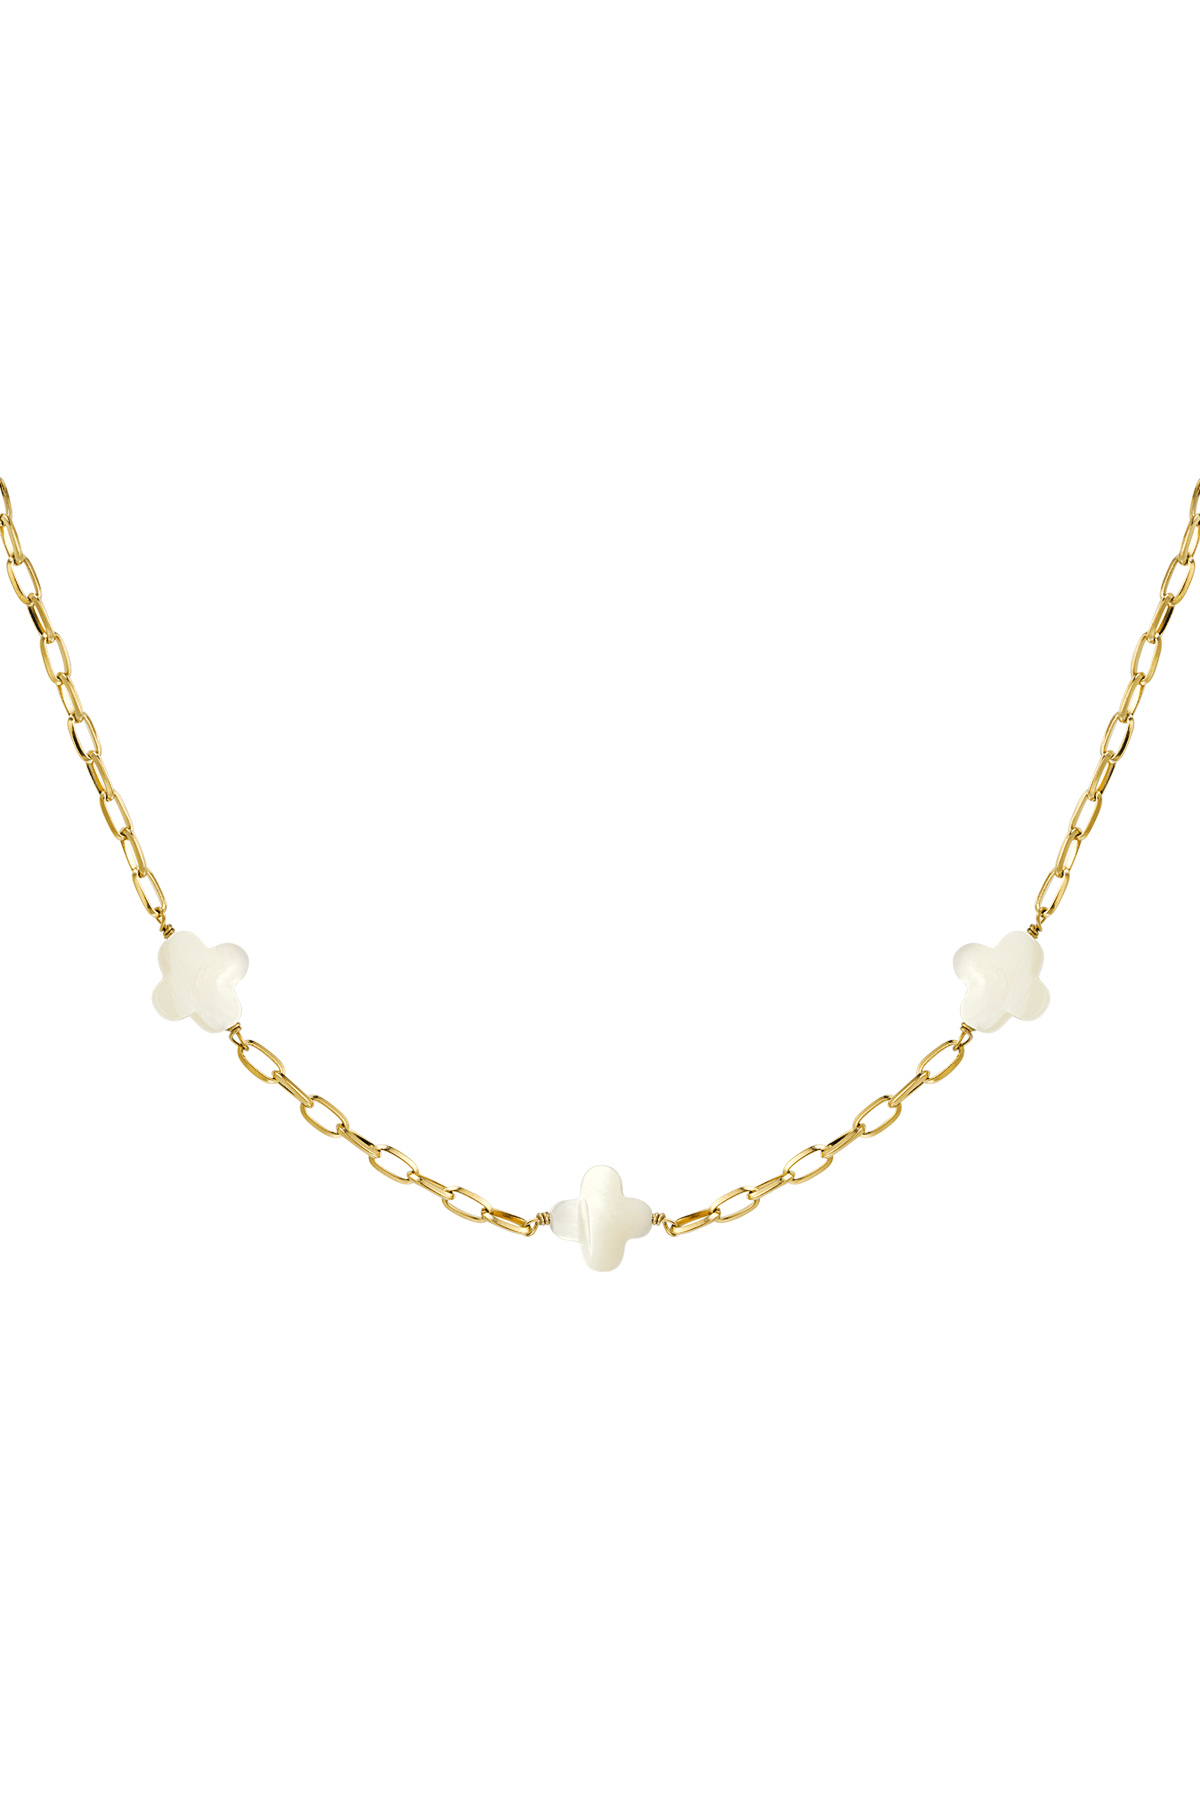 Necklace seashell clovers - Gold Stainless Steel h5 